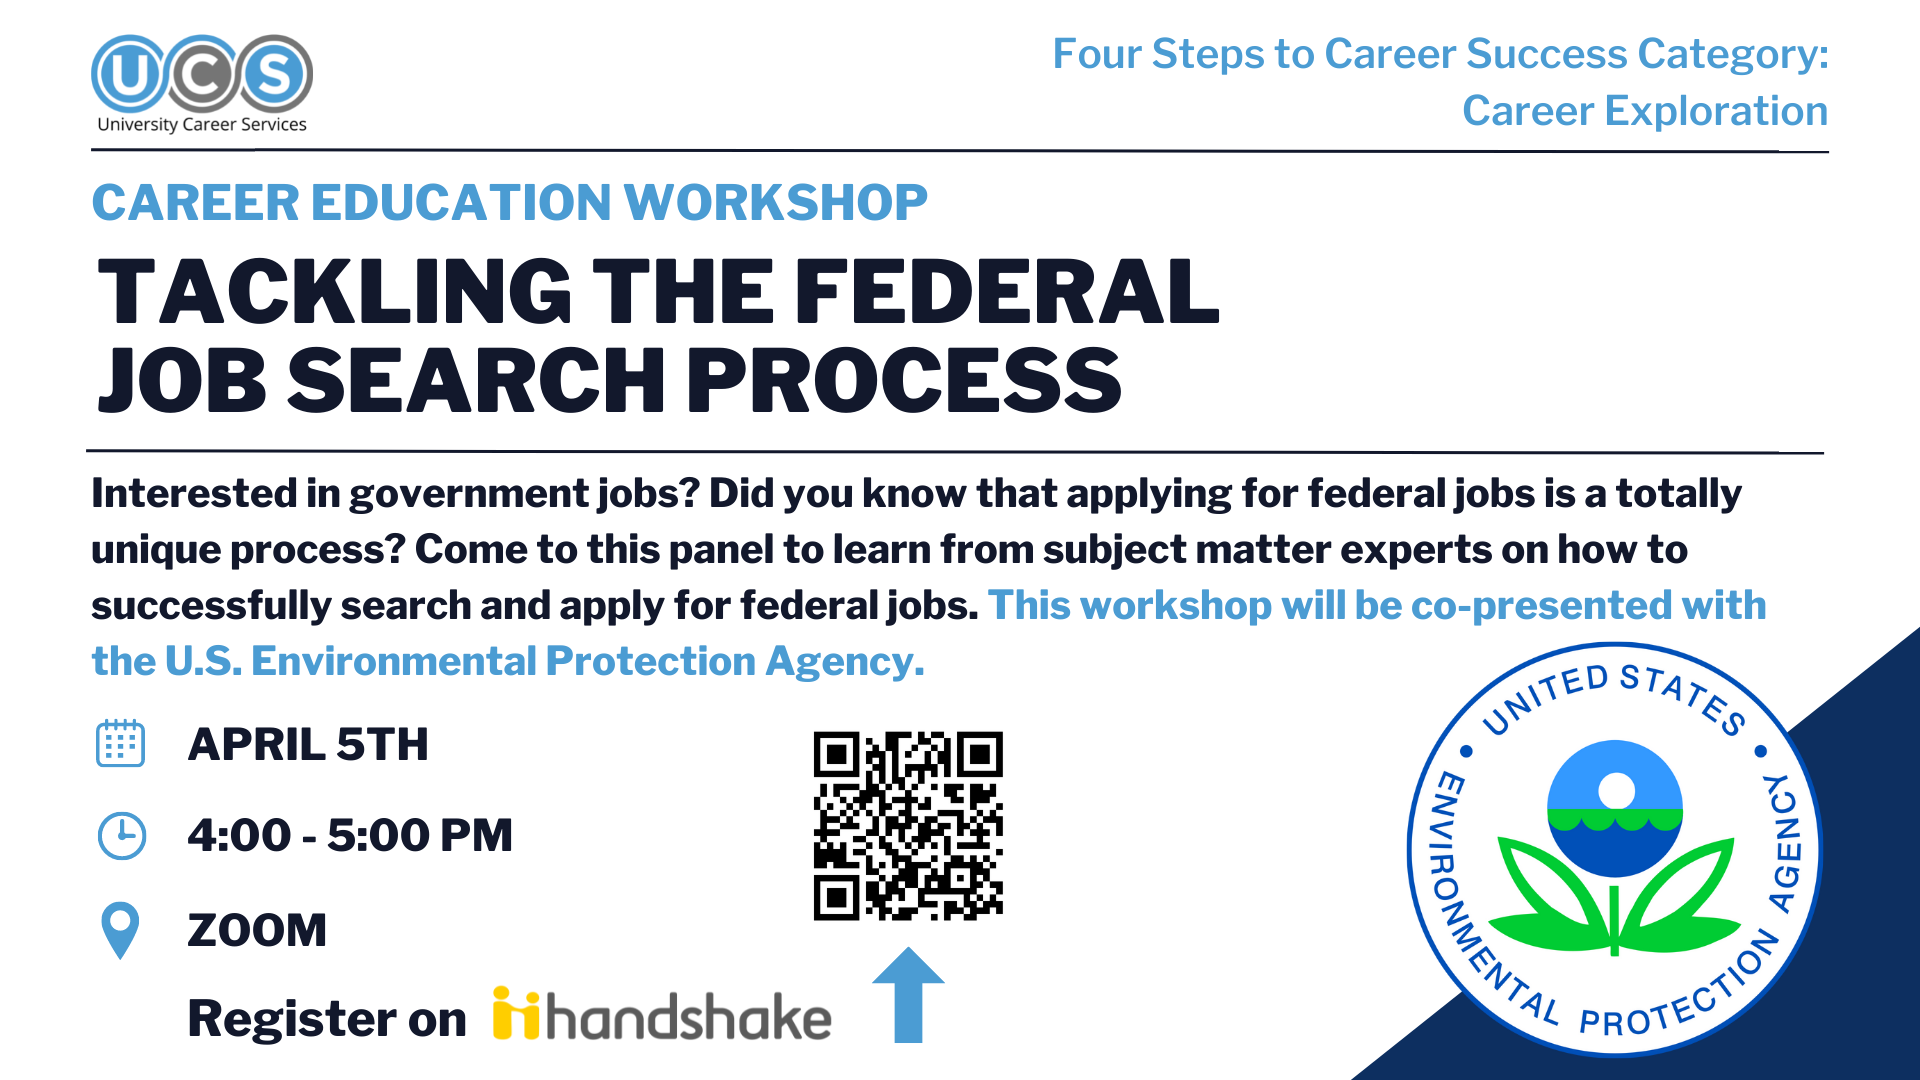 Interested in government jobs? Did you know that applying for federal jobs is a totally unique process? Come to this panel to learn from subject matter experts on how to successfully search and apply for federal jobs. This workshop will be co-presented wi